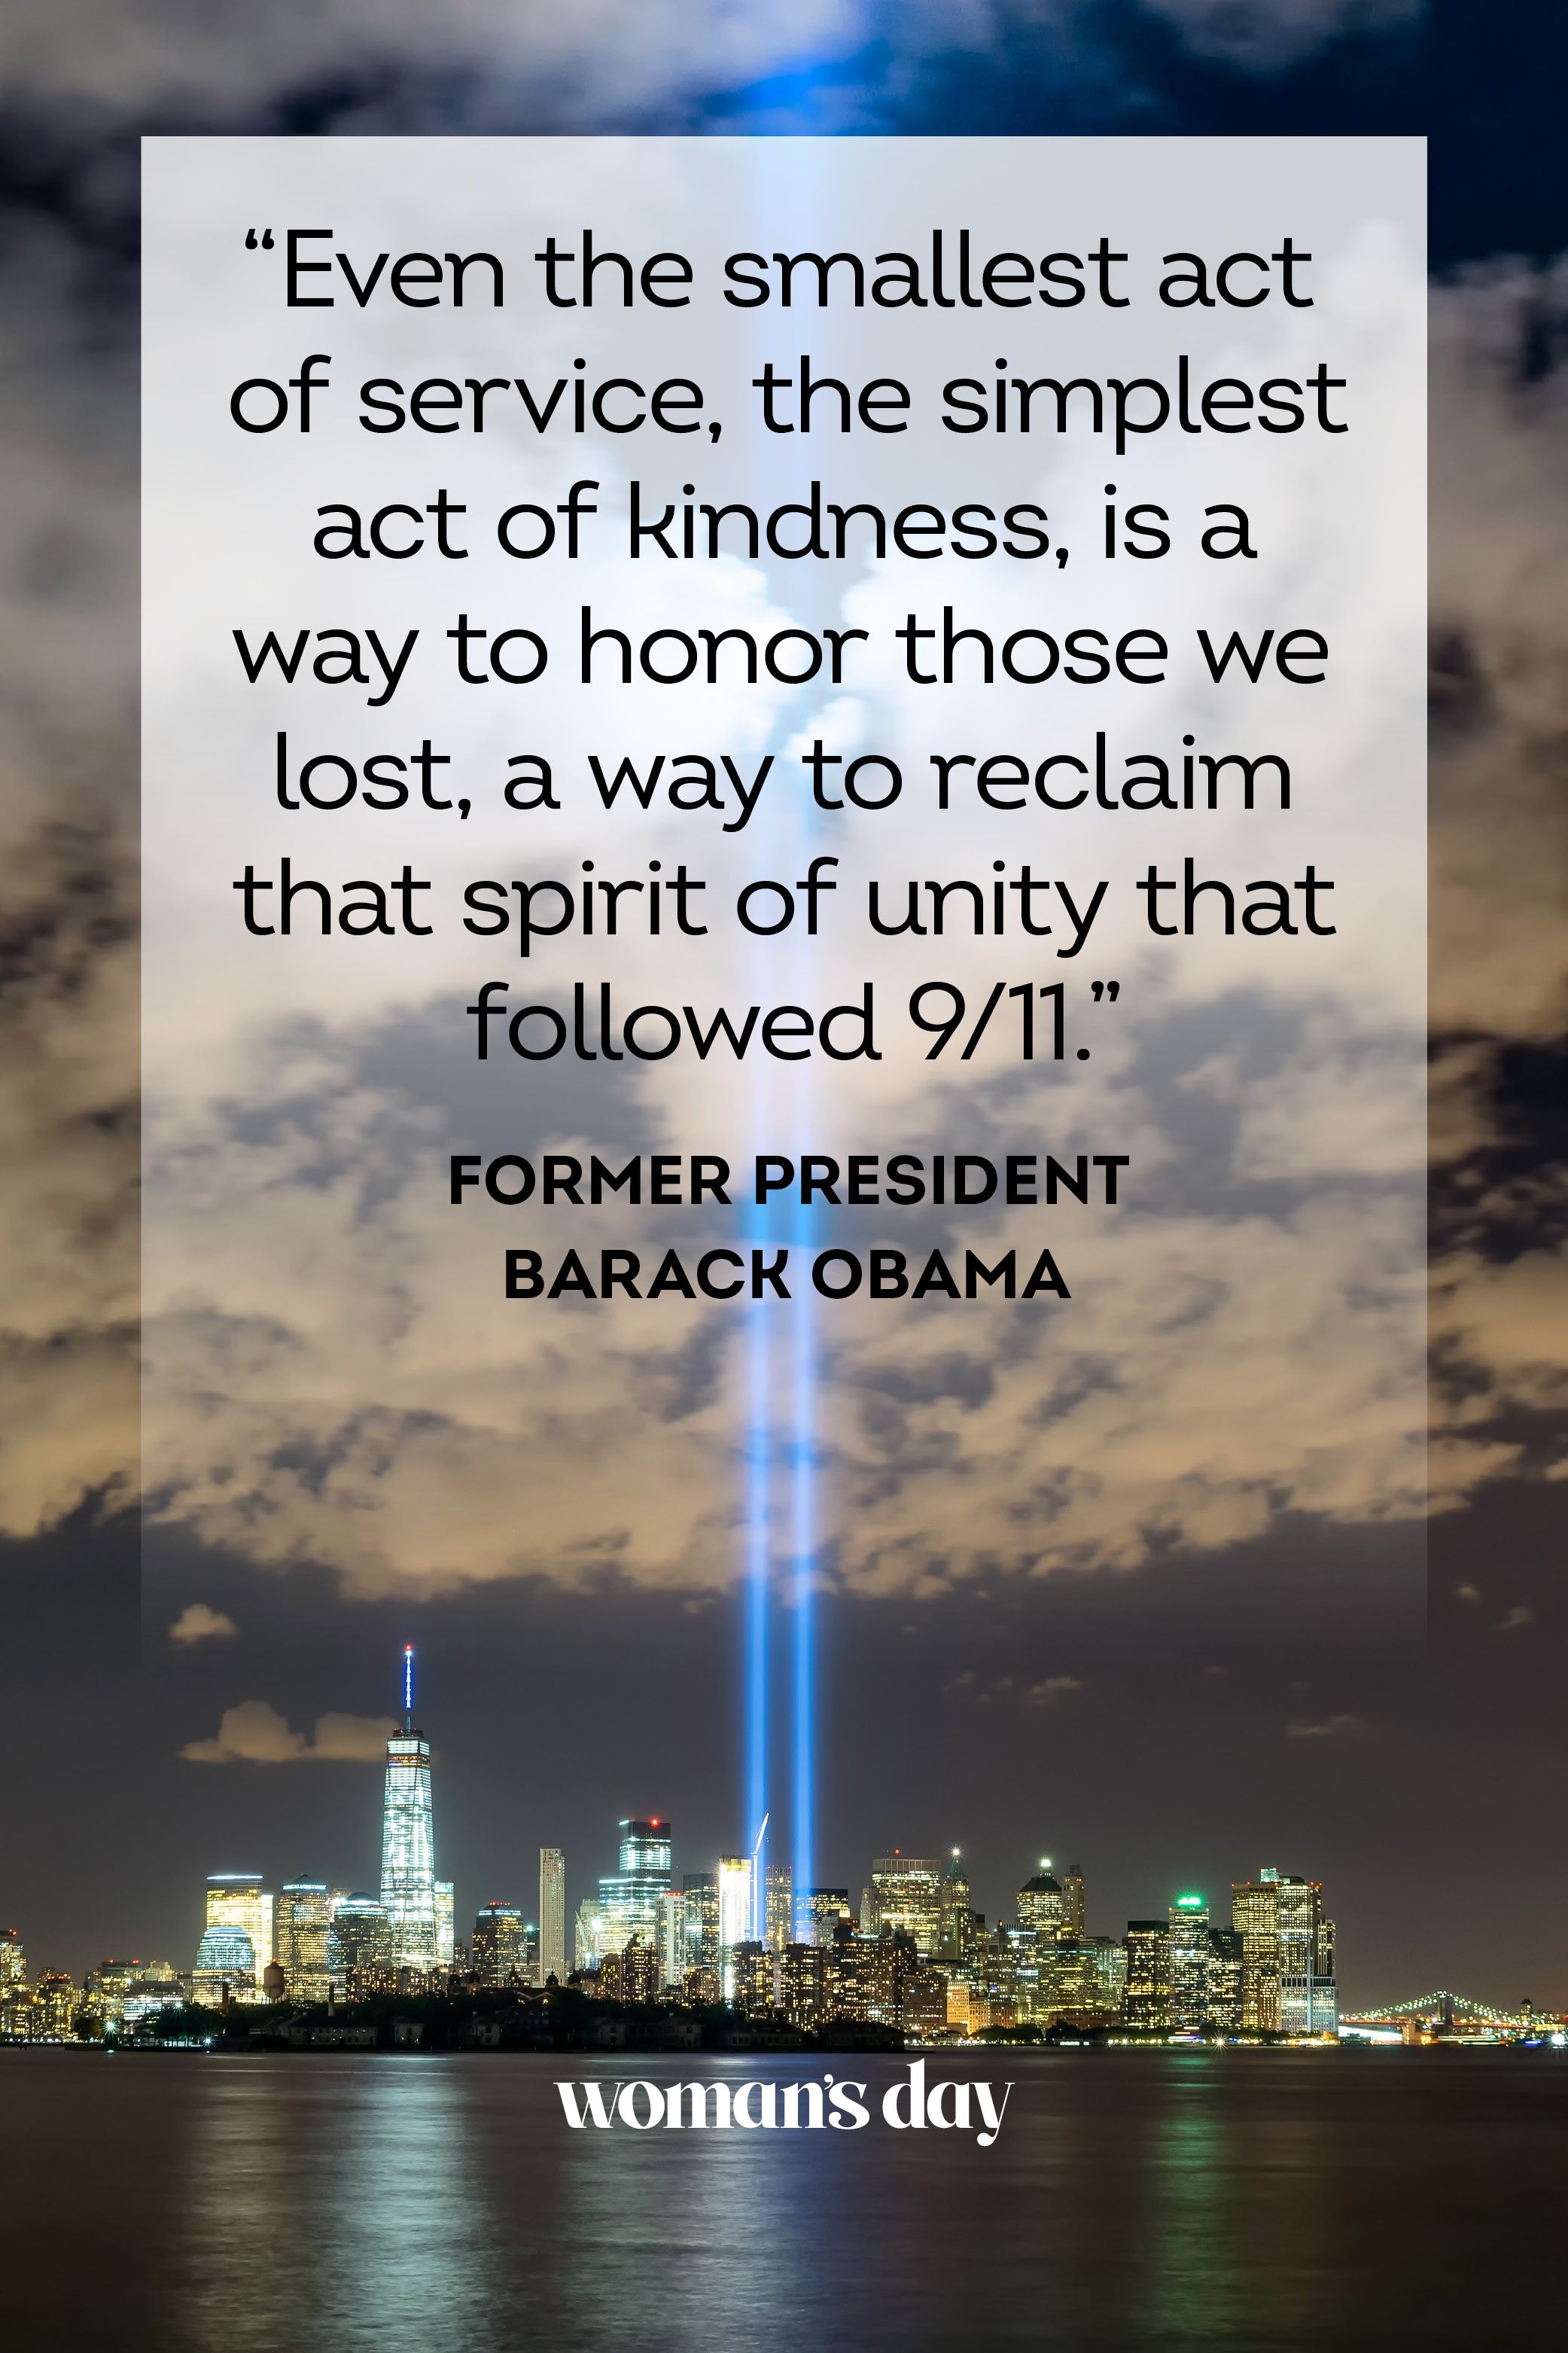 Inspirational 9/11 Quotes to Never Forget September 11